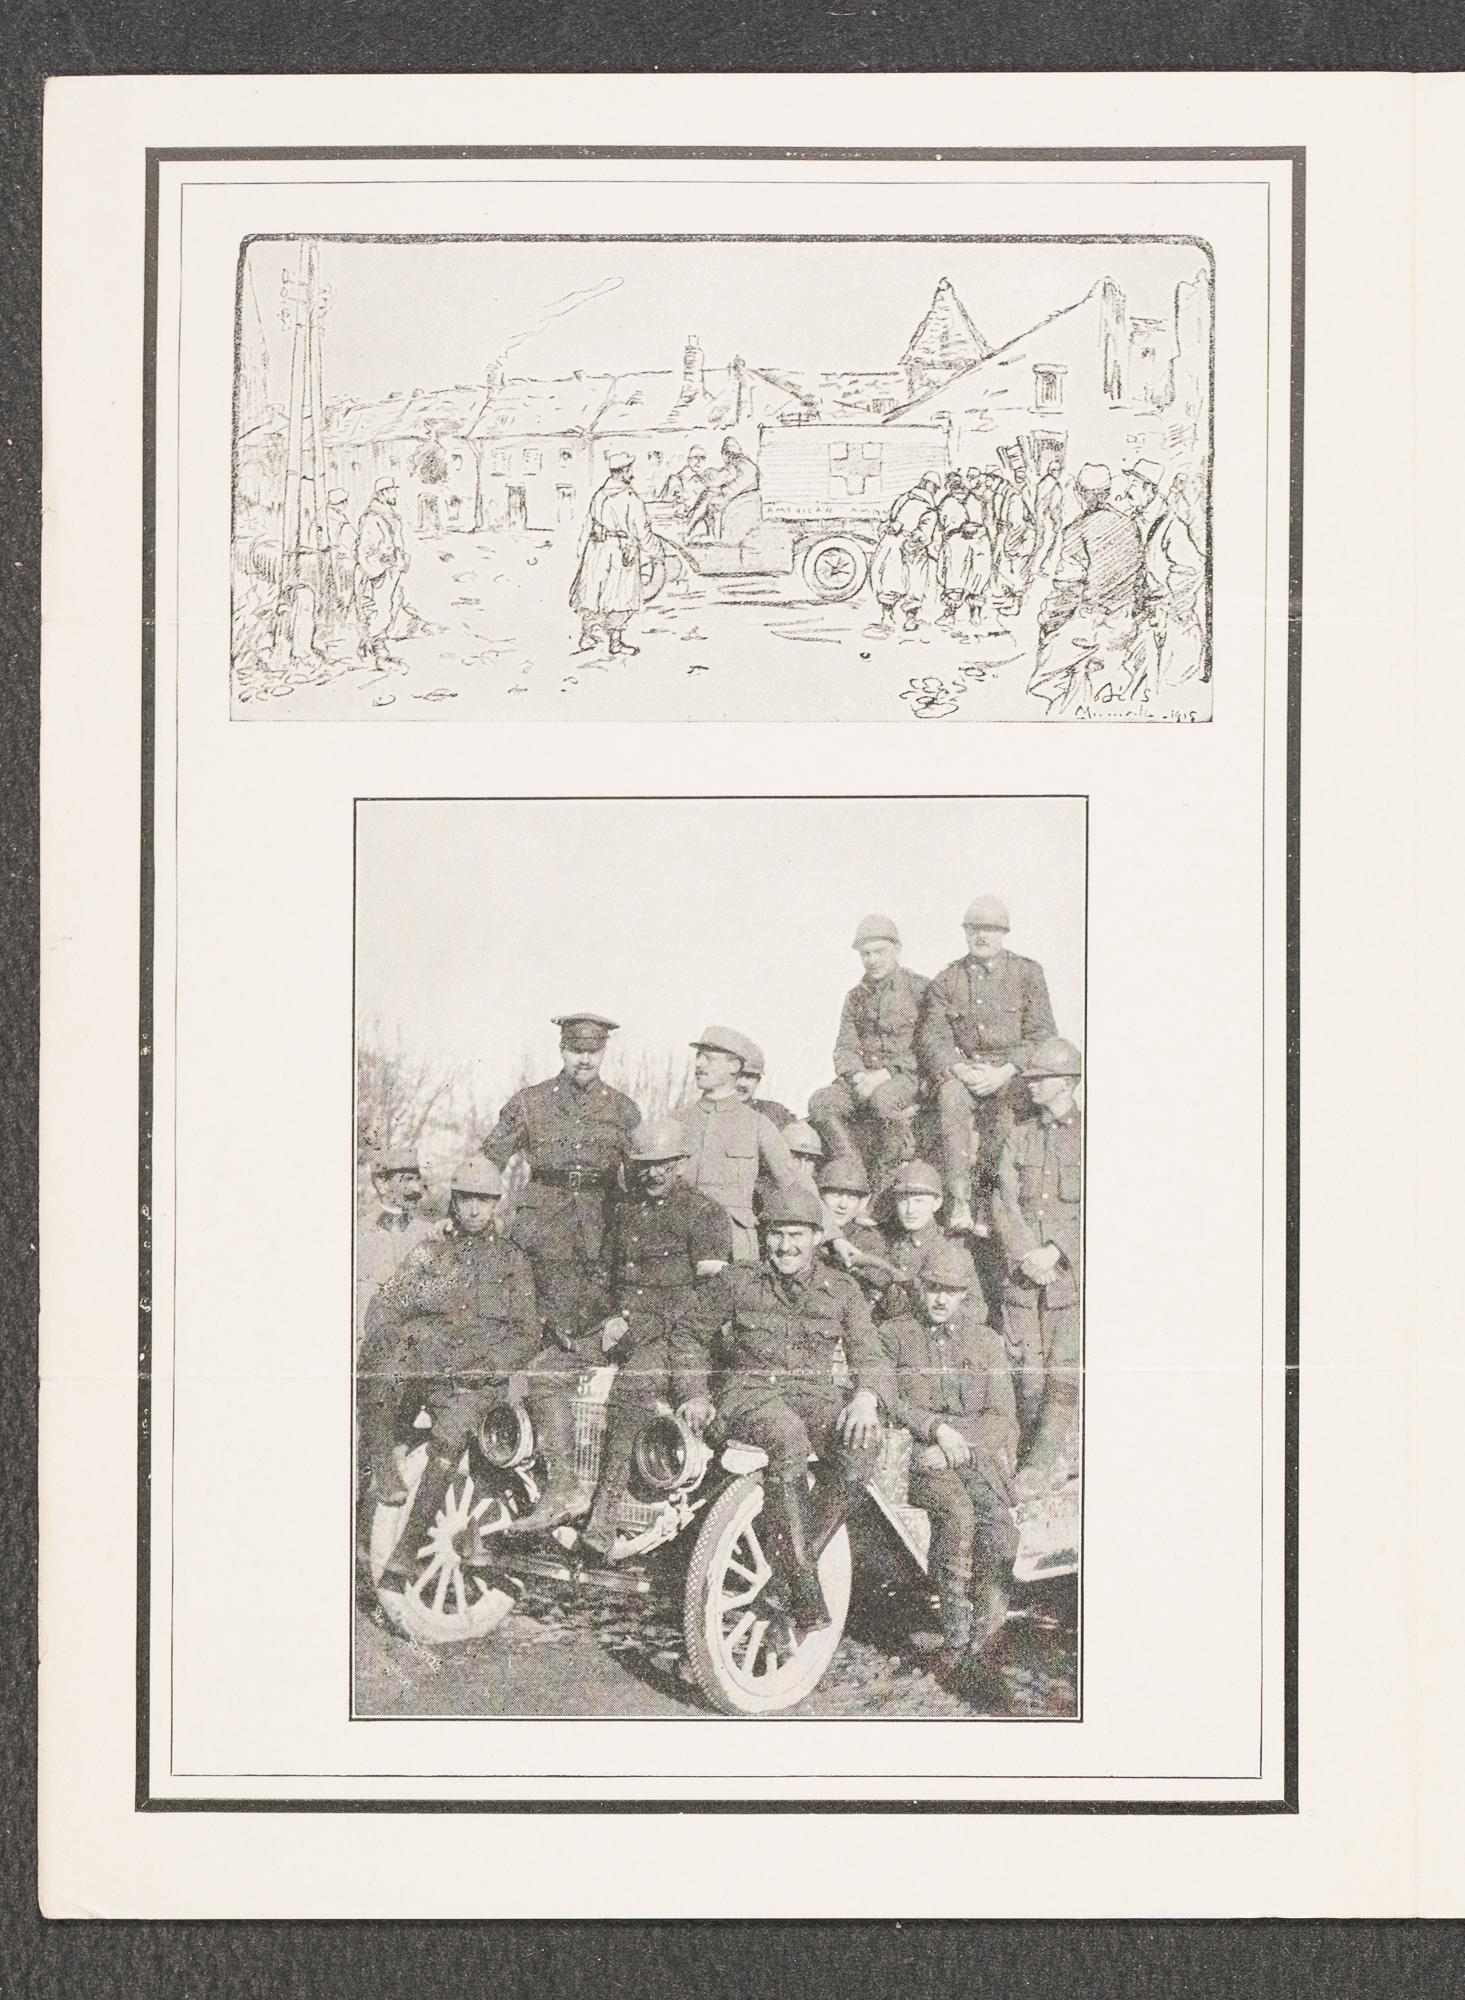 A page from a pamphlet with a photo of a group of men on a jeep.